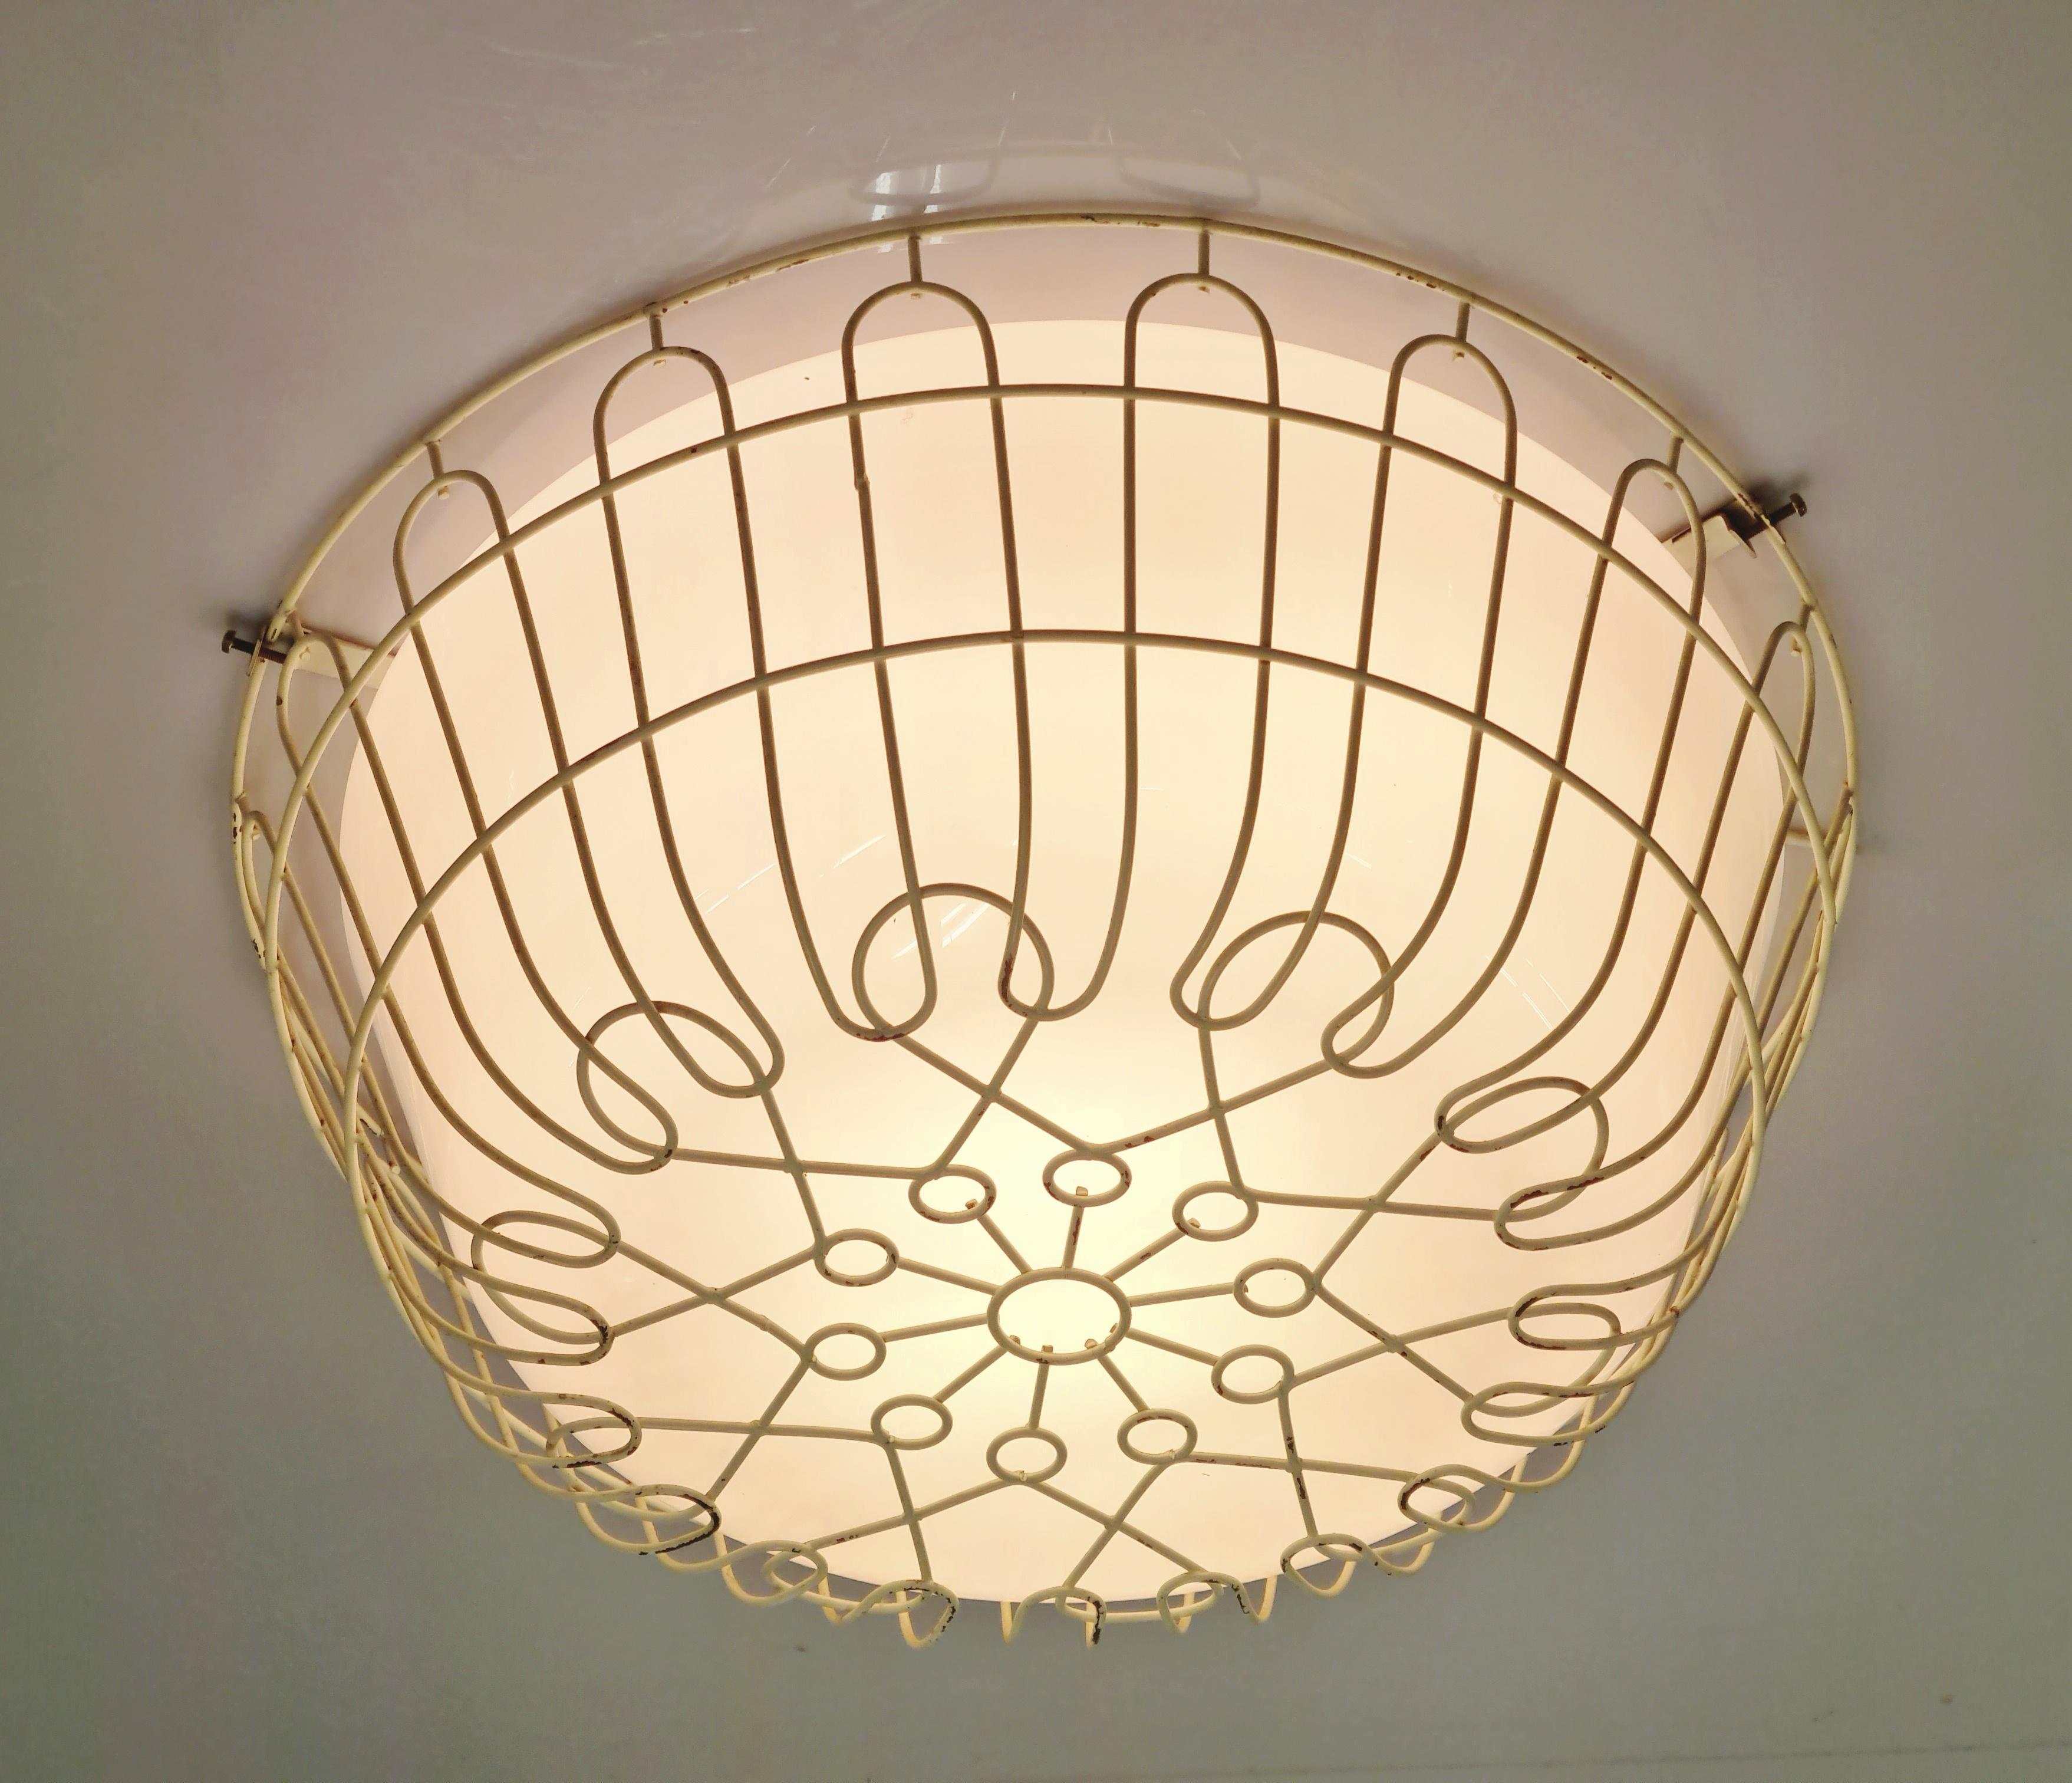 A Beautiful and Lively Lisa Johansson-Papé Ceiling Lamp Model 71-115, Orno 1950s For Sale 7